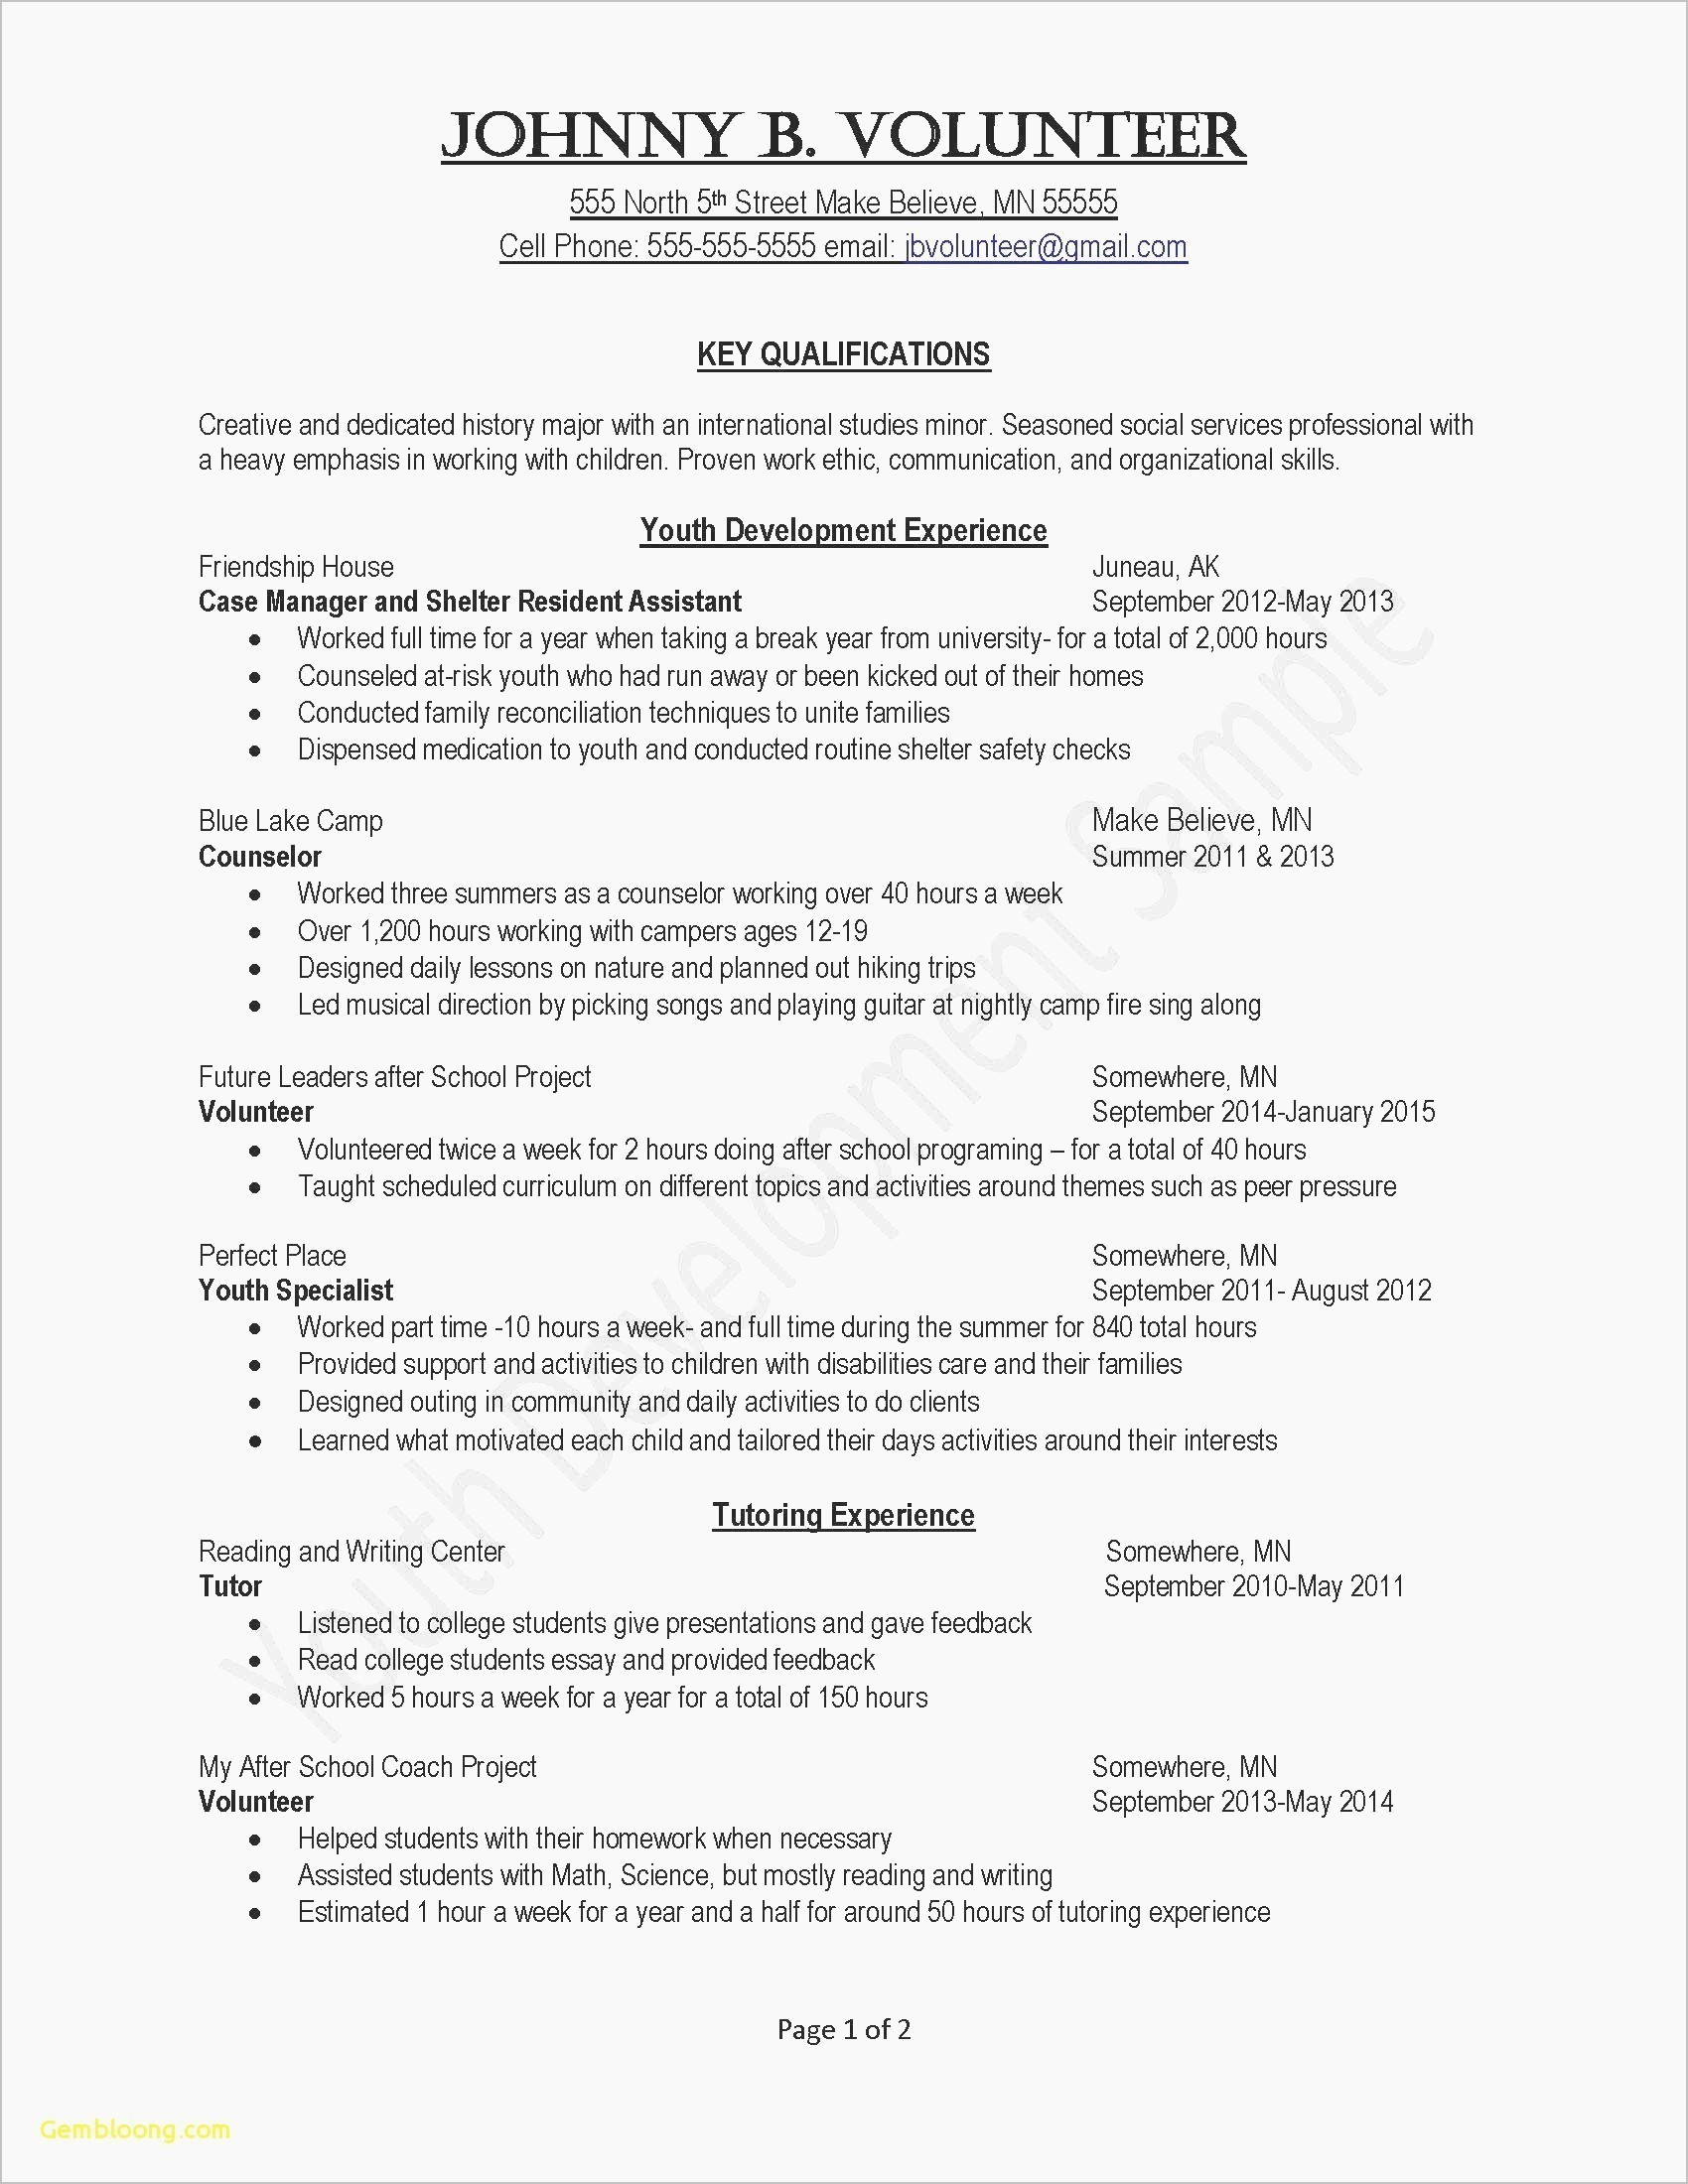 Cover Letter Template Word 2013 Lovely New Cover Letter Template for Word 2013